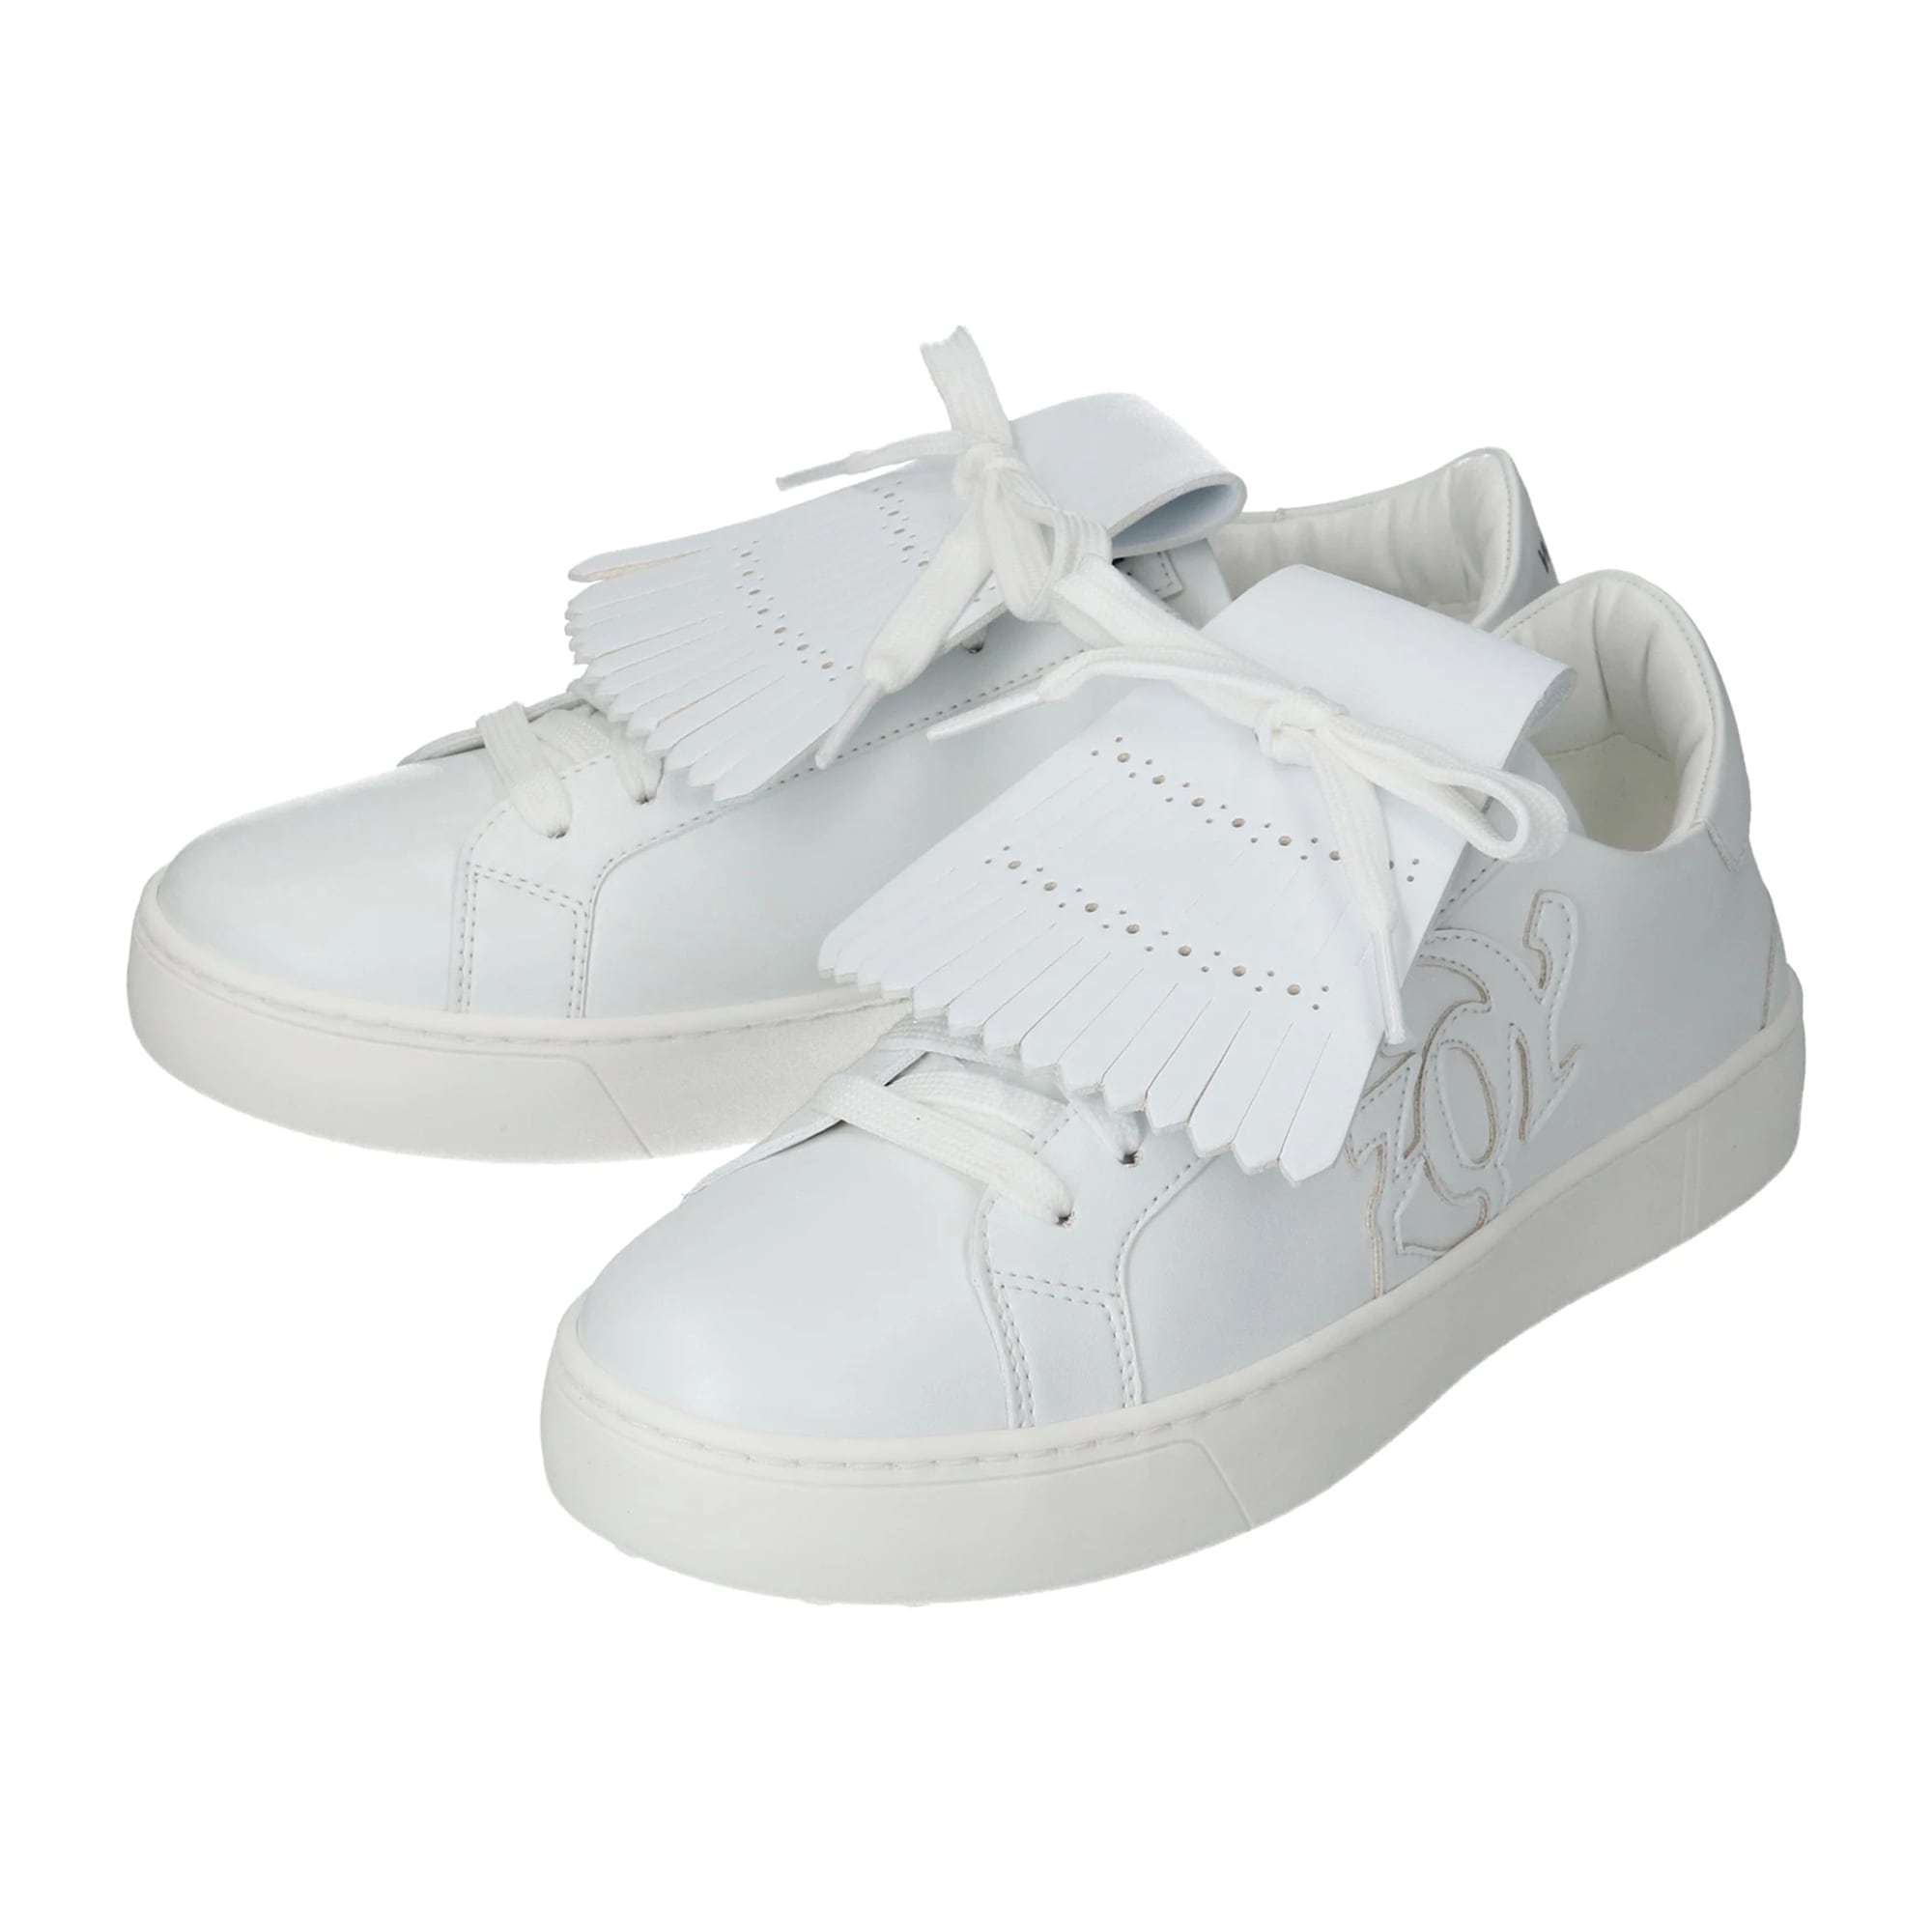 WOMENS GOLF SHOES ネイビー 071789801 - ZOY OFFICIAL